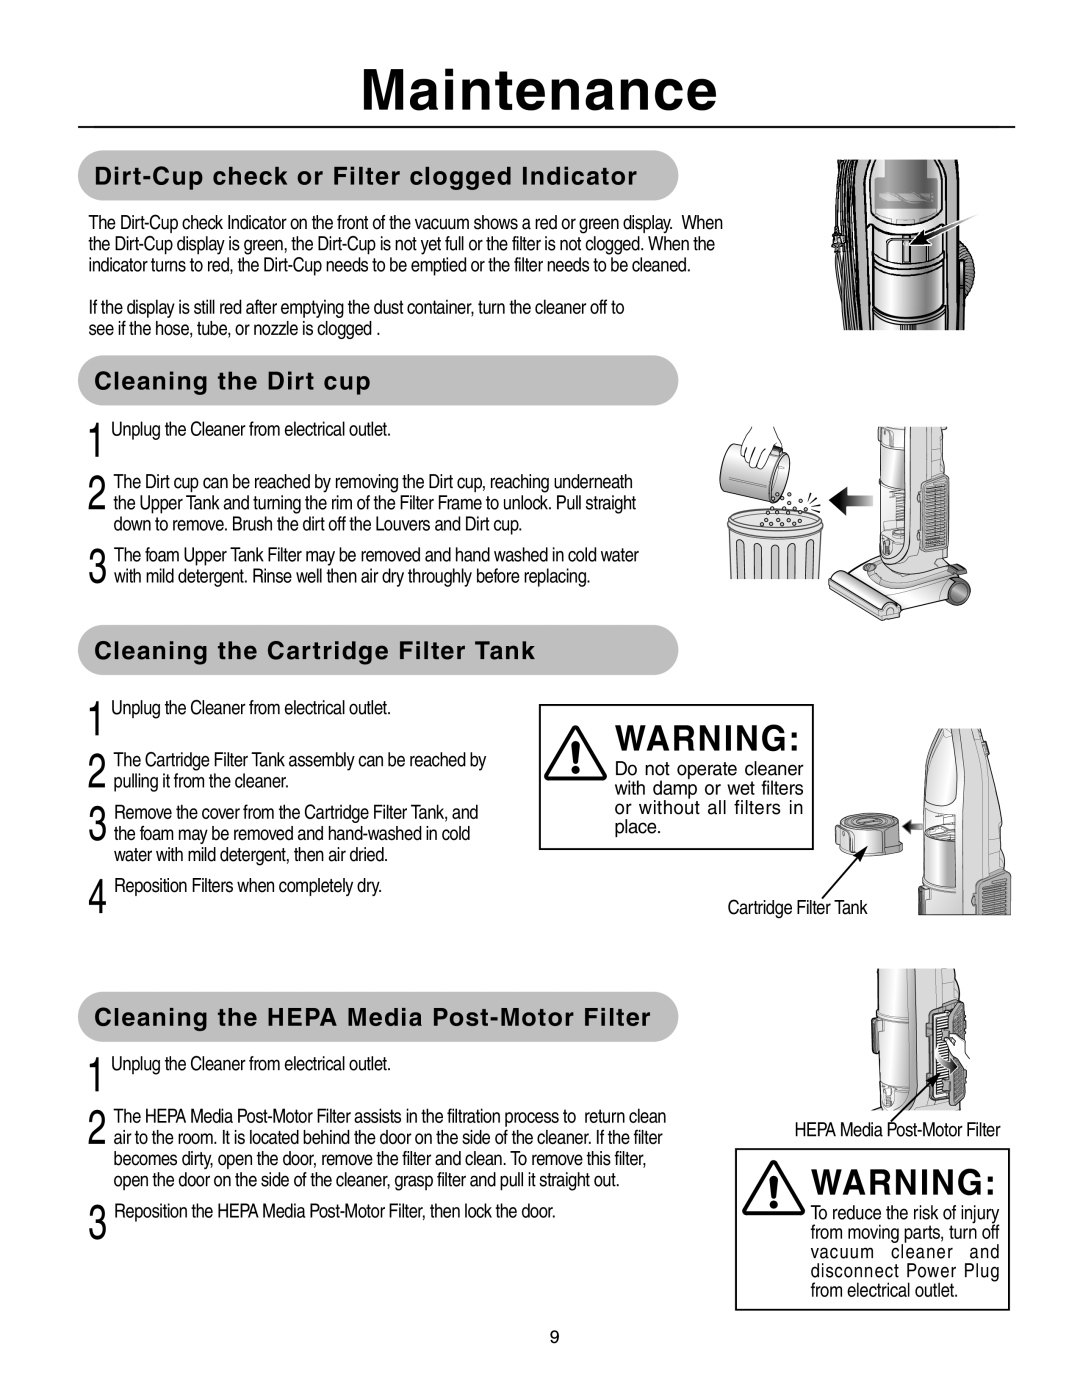 Samsung SU-8500 operating instructions Maintenance, Dirt-Cupcheck or Filter clogged Indicator, Cleaning the Dirt cup 